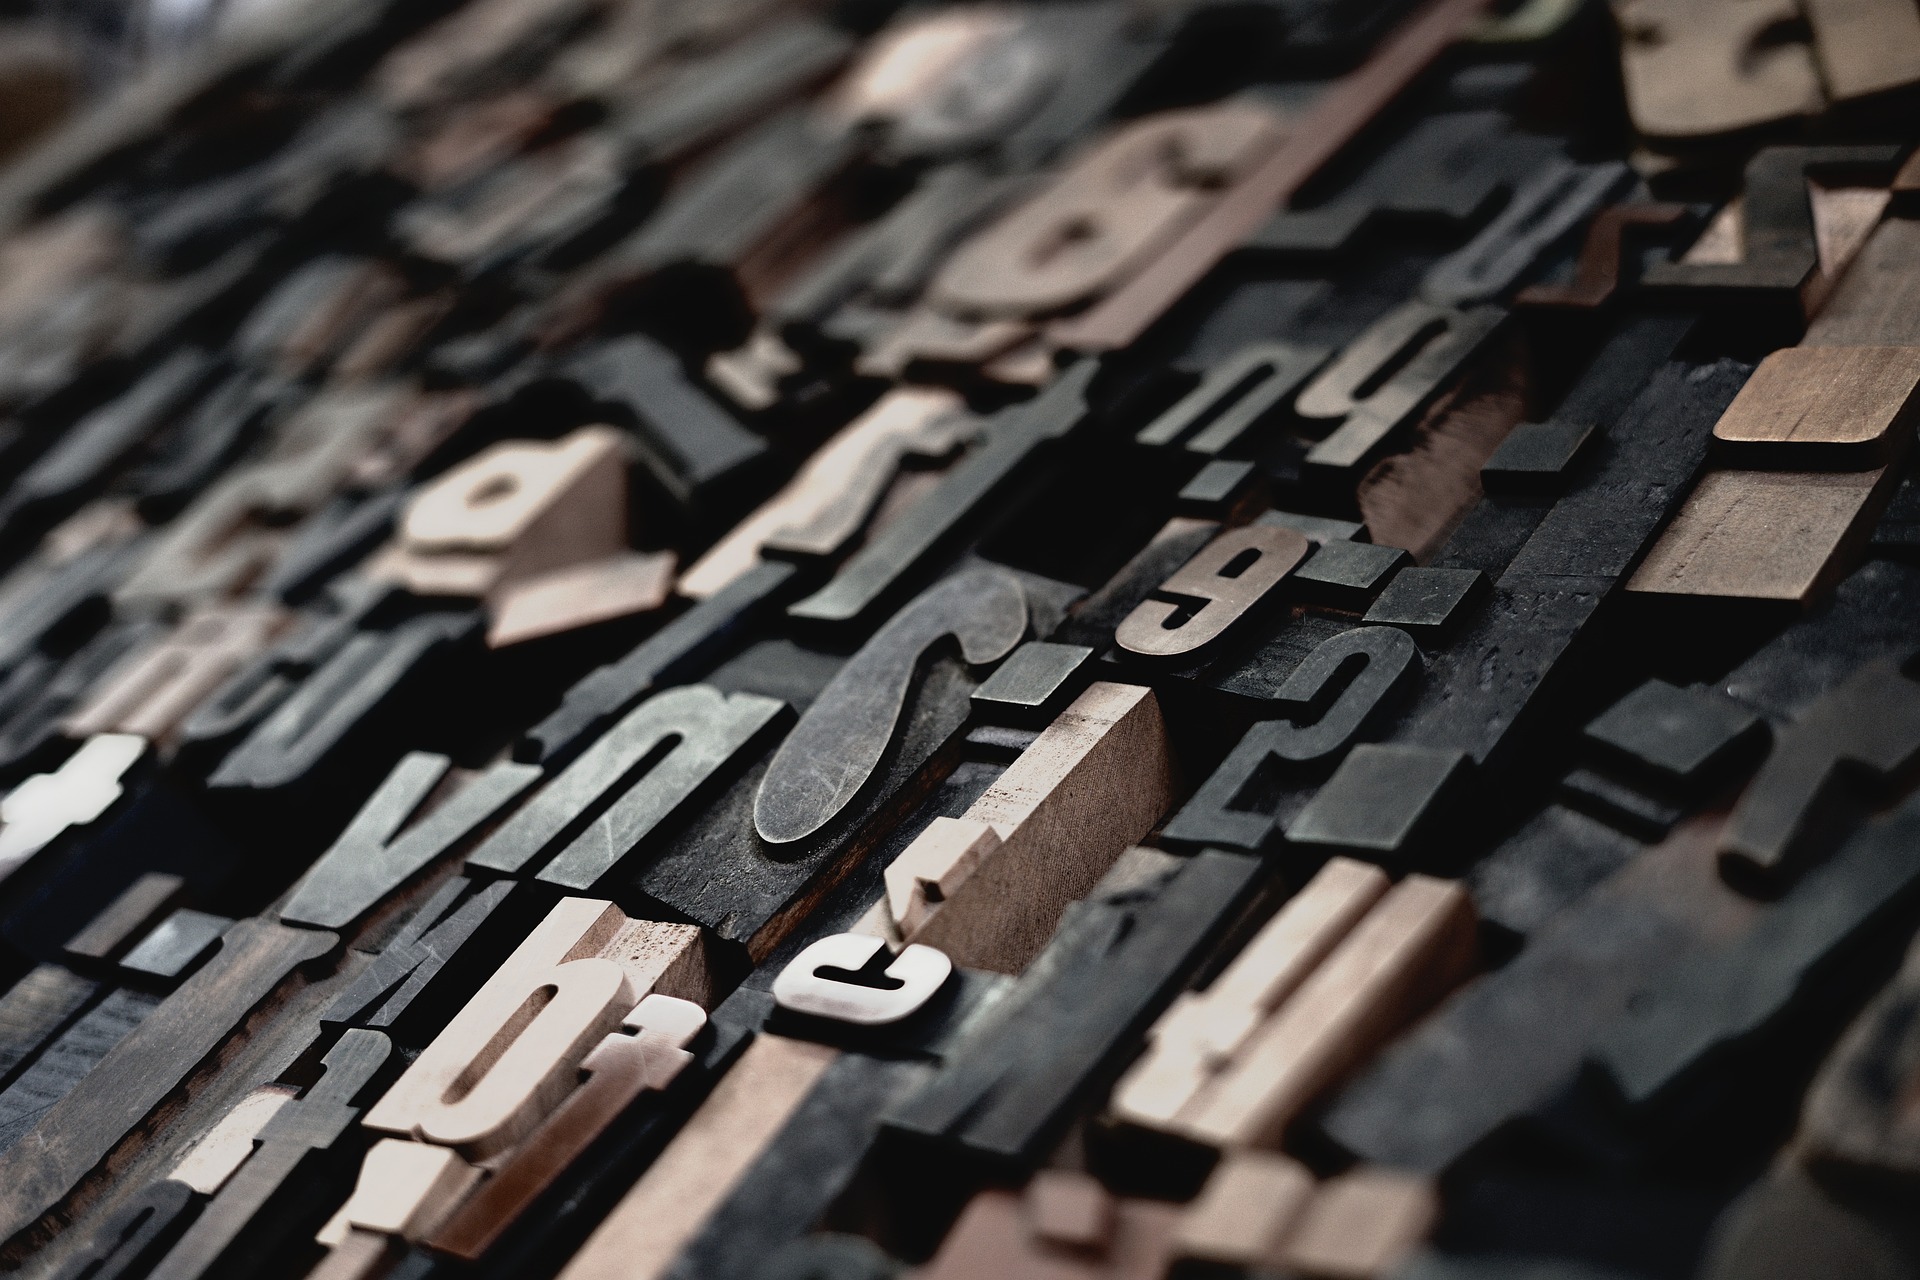 A jumble of metal types showing letters.